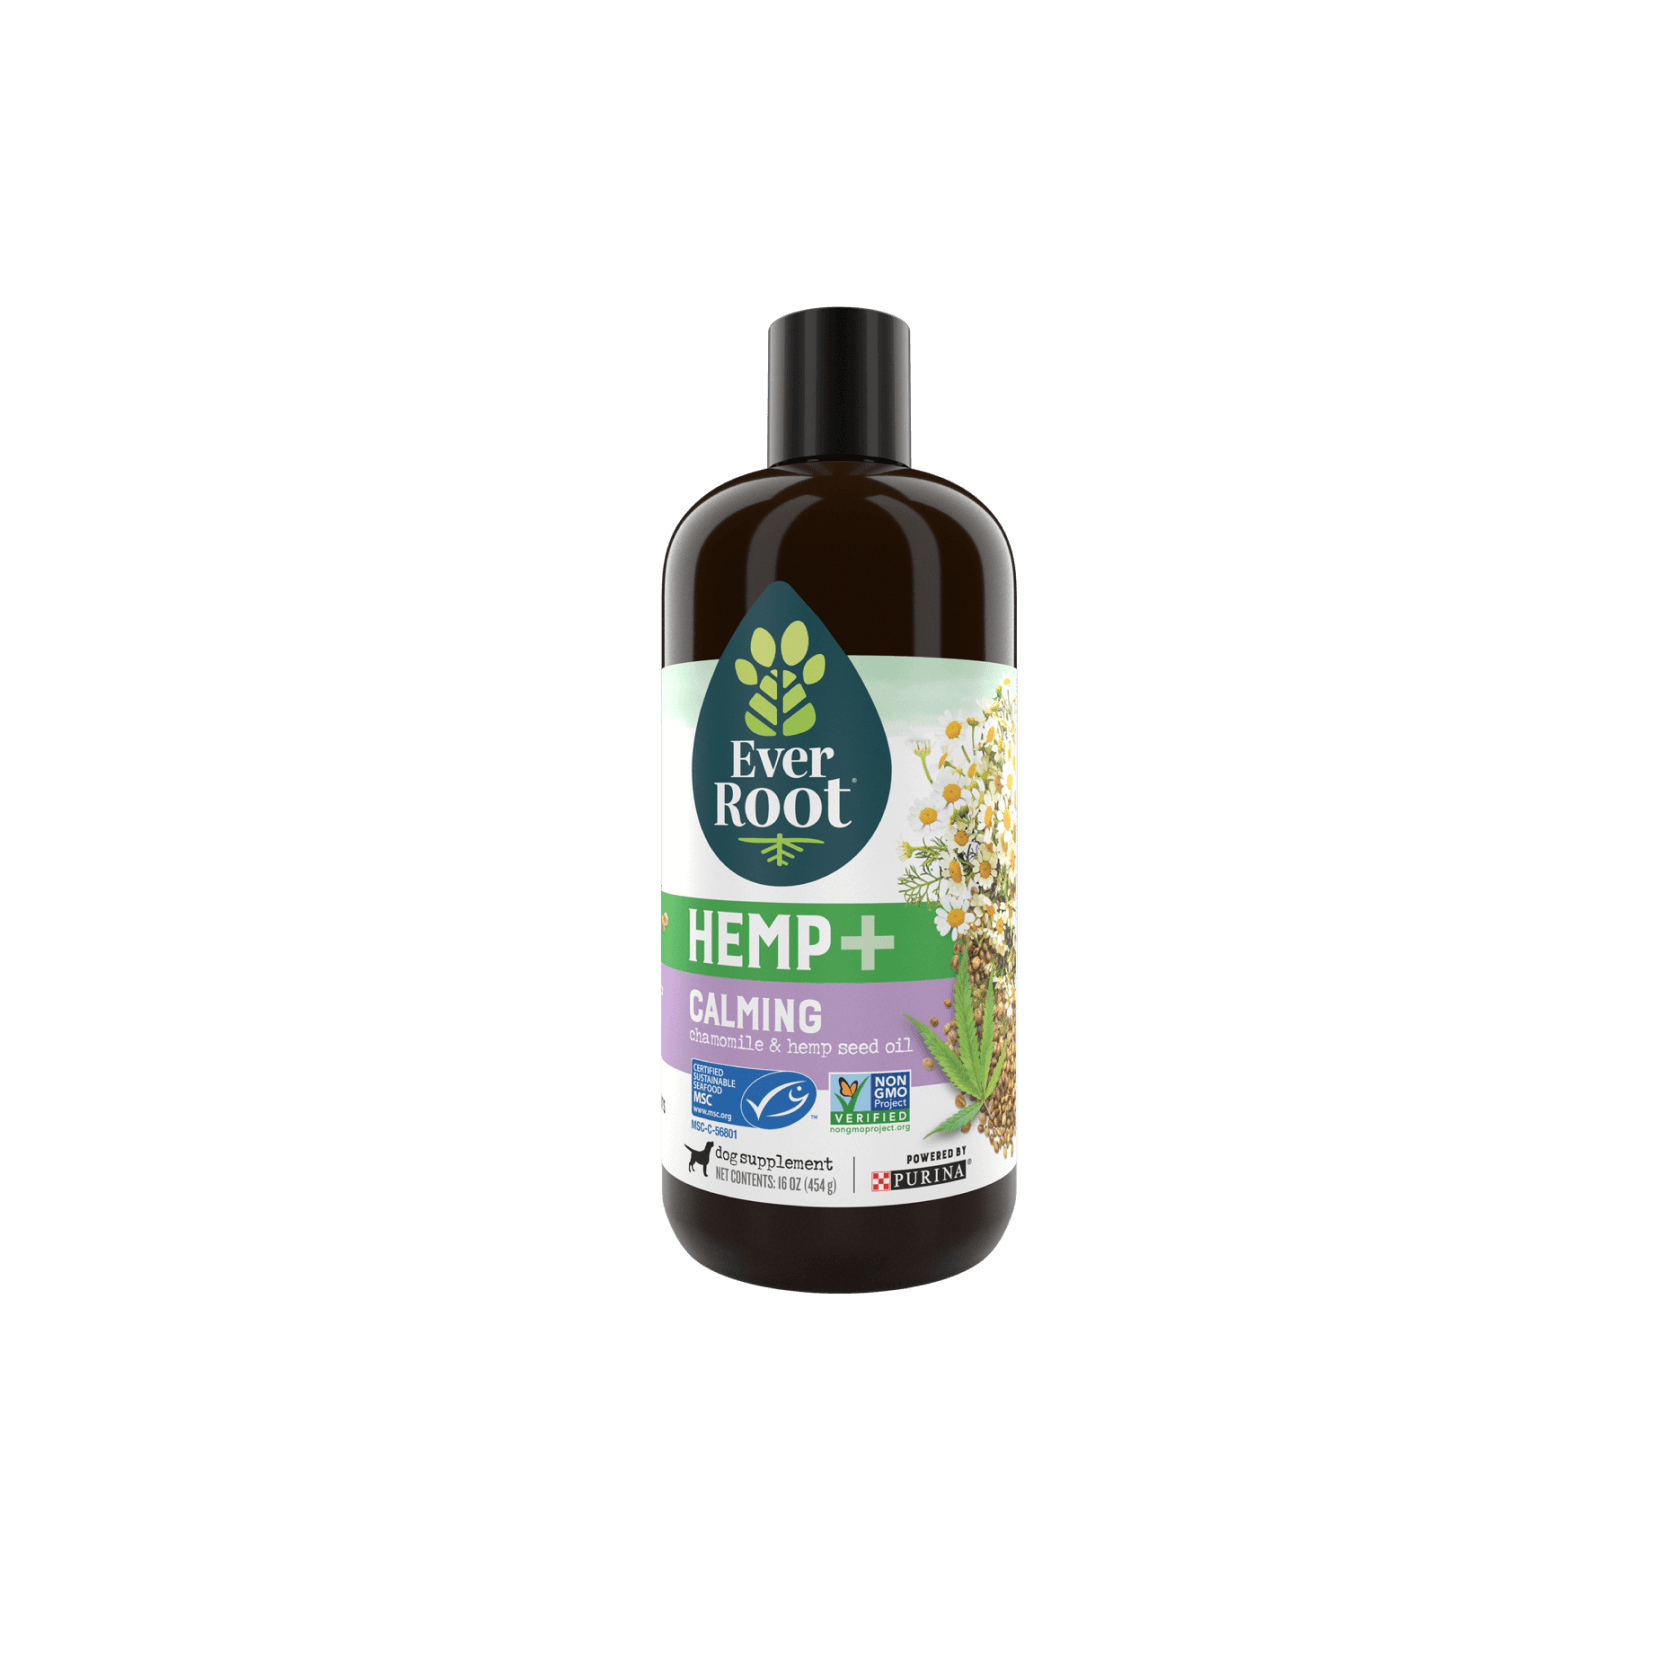 EverRoot Calming Chamomile and Hemp Seed Oil Bottle